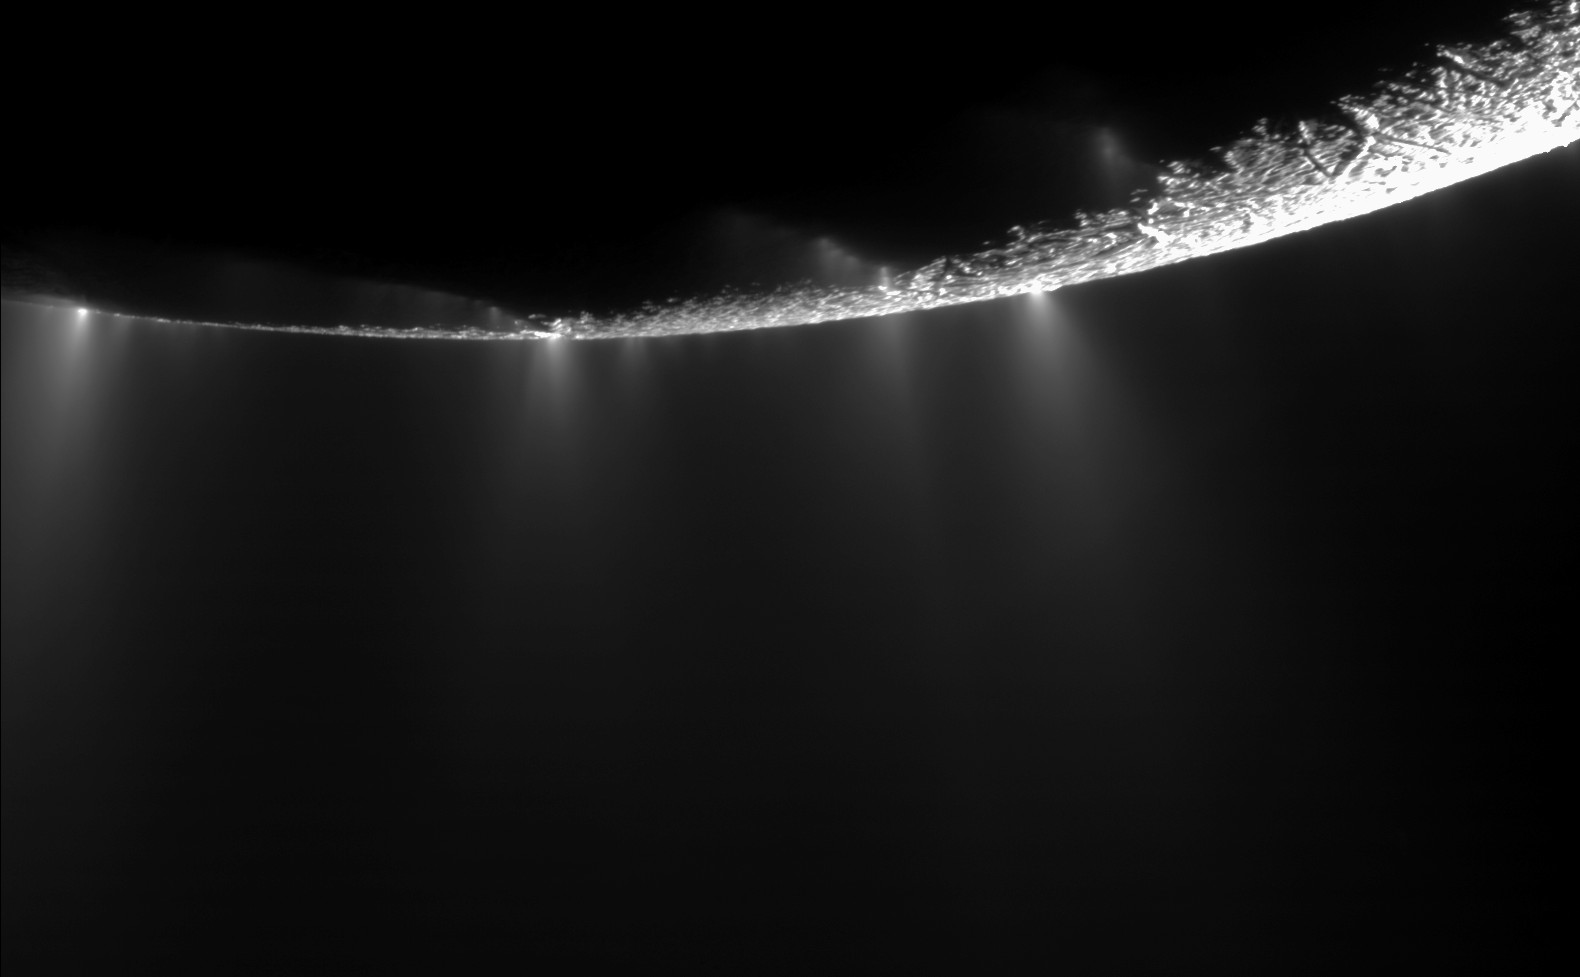 The geysers of Enceladus, erupting from deep fissures at the south pole. Image Credit: NASA/JPL-Caltech